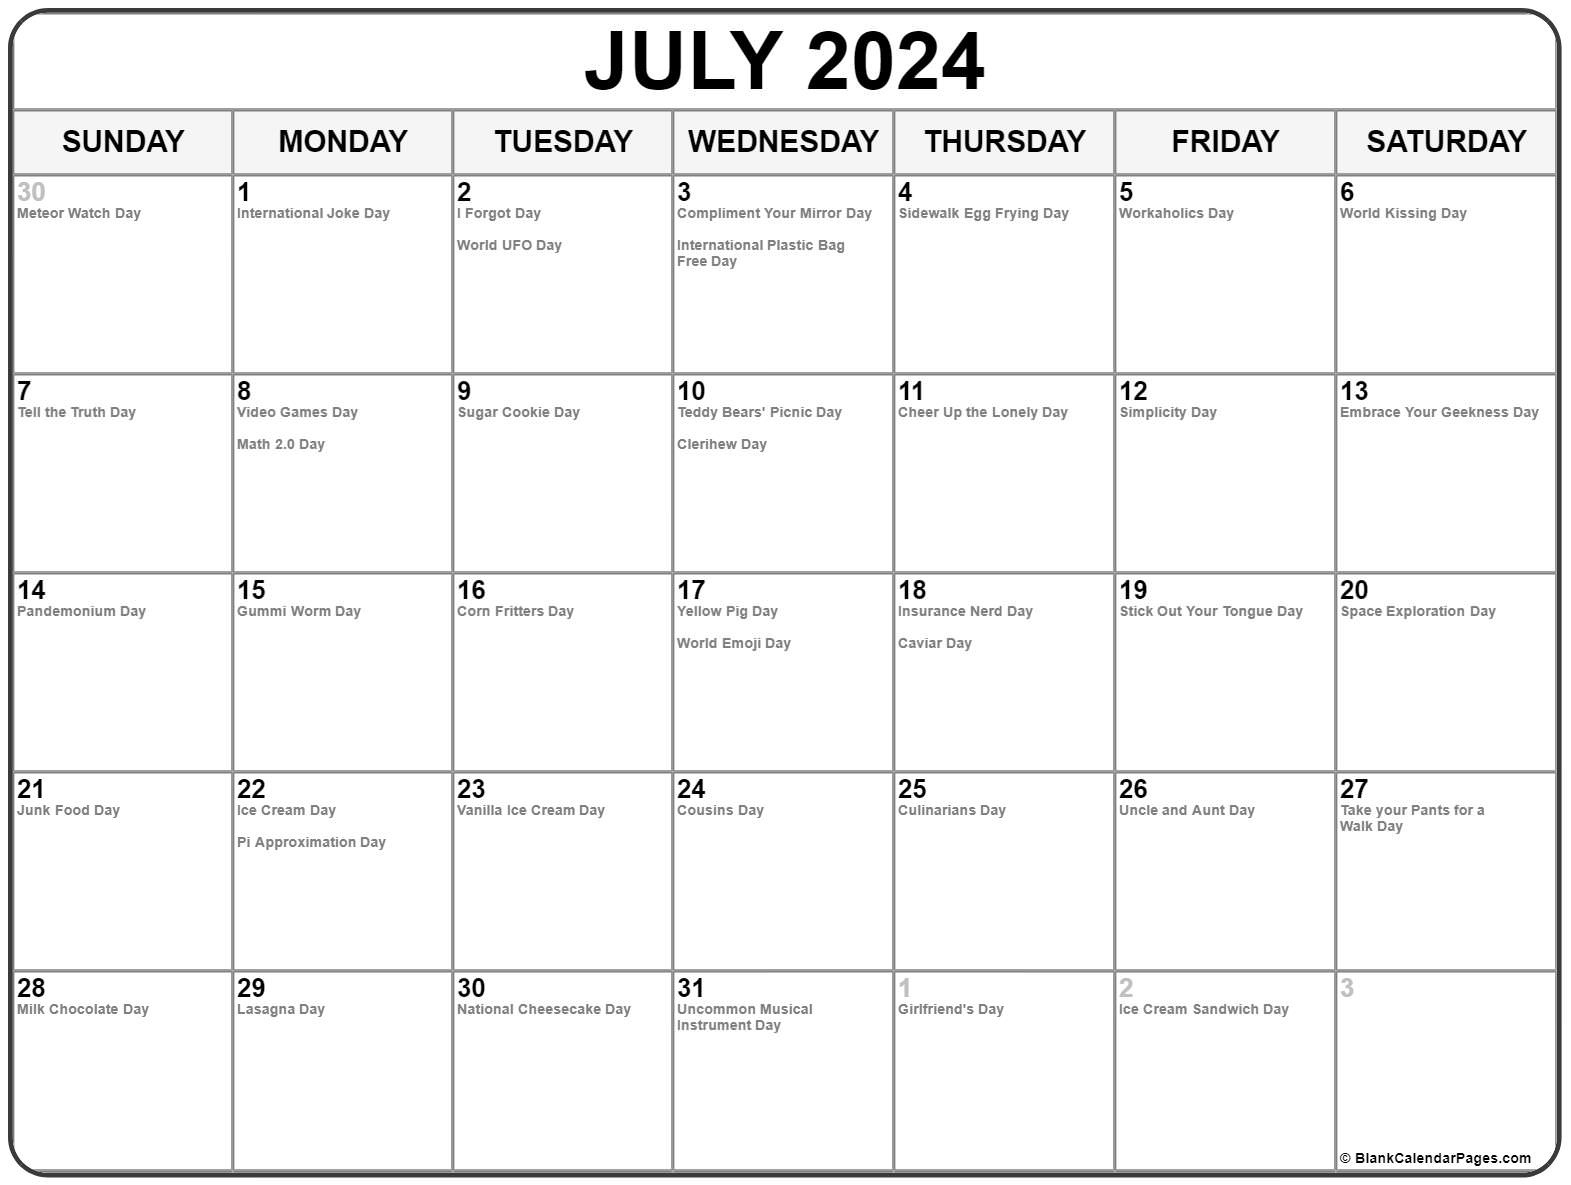 July 2024 With Holidays Calendar for National Calendar Day July 2024